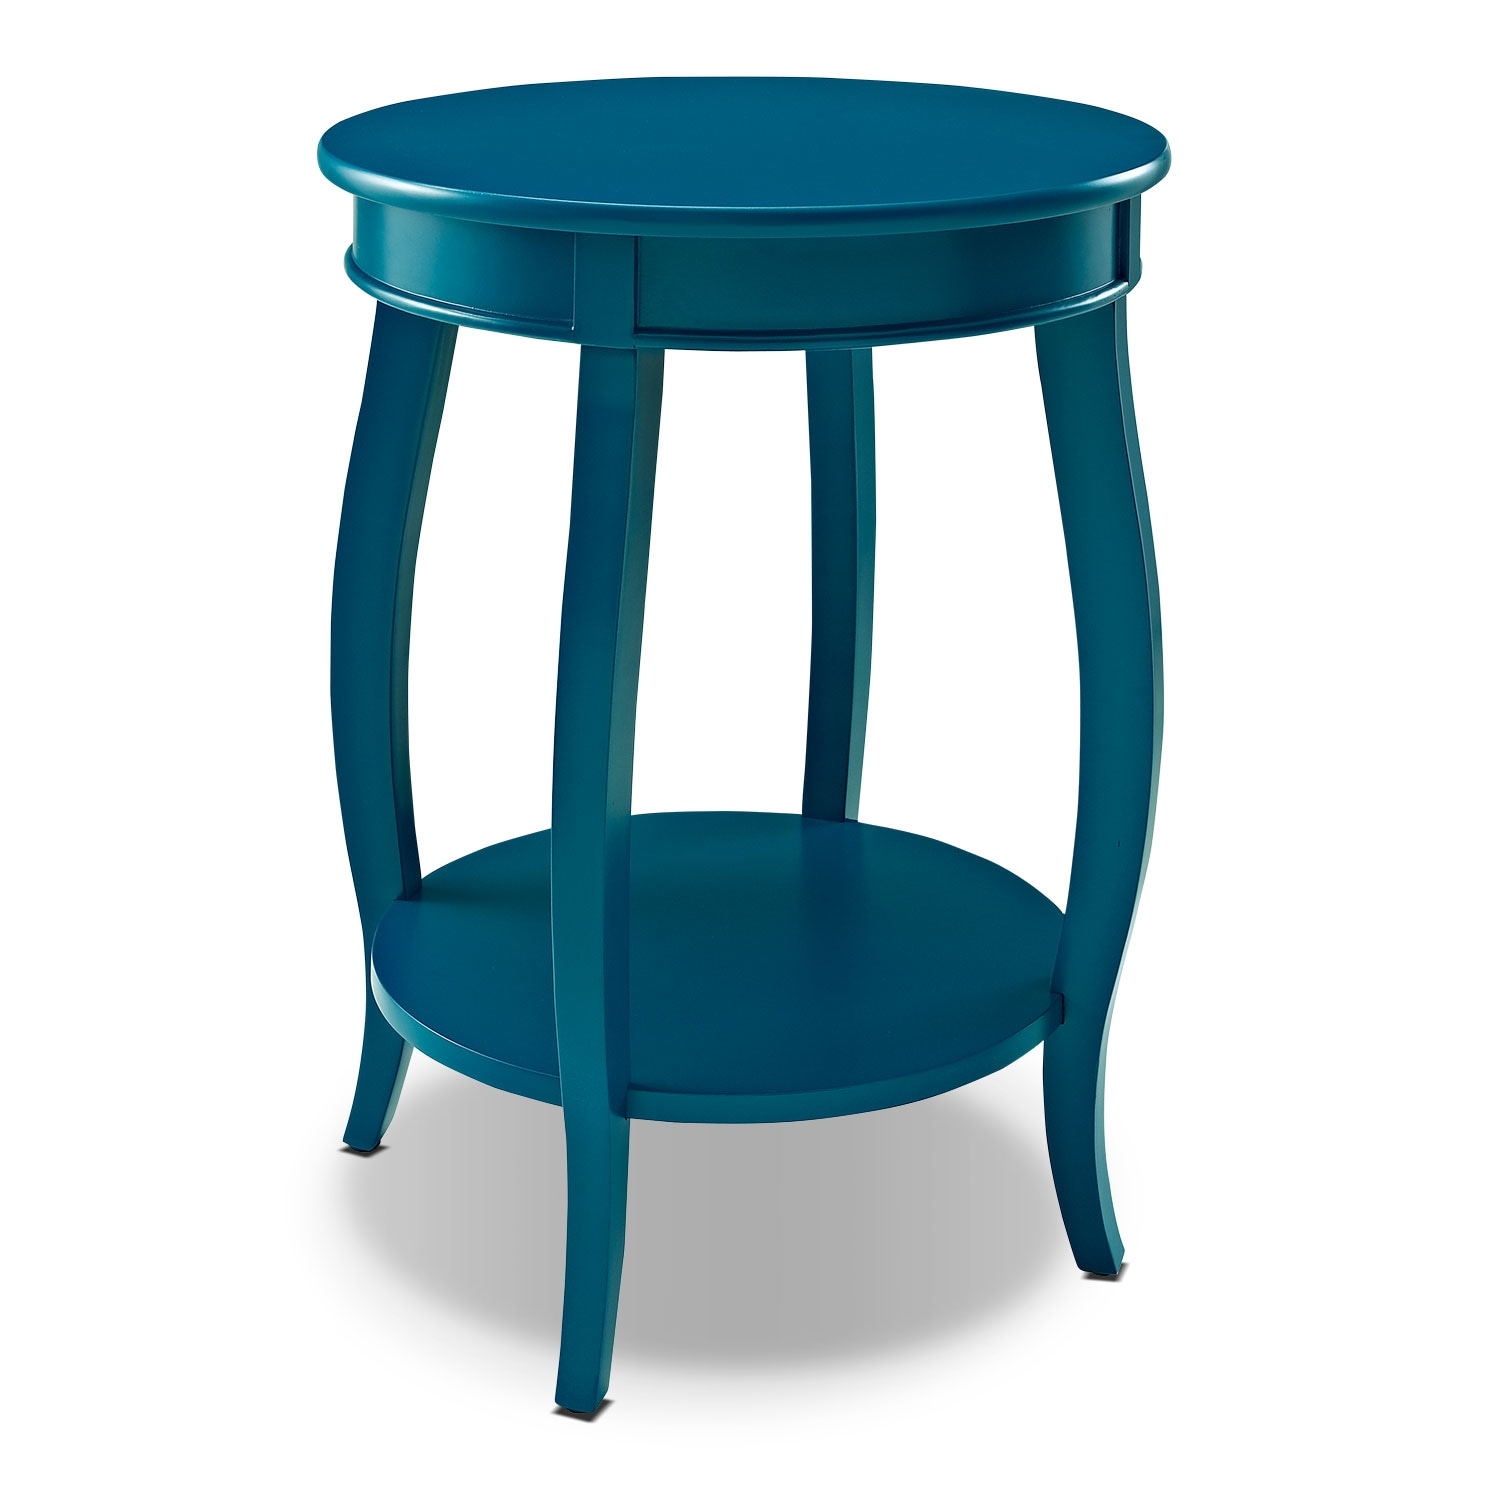 sage target decorative white cabinet glass tables and bench colored threshold tall green ott modern room teal outdoor furniture for storage living kijiji accent round colorful